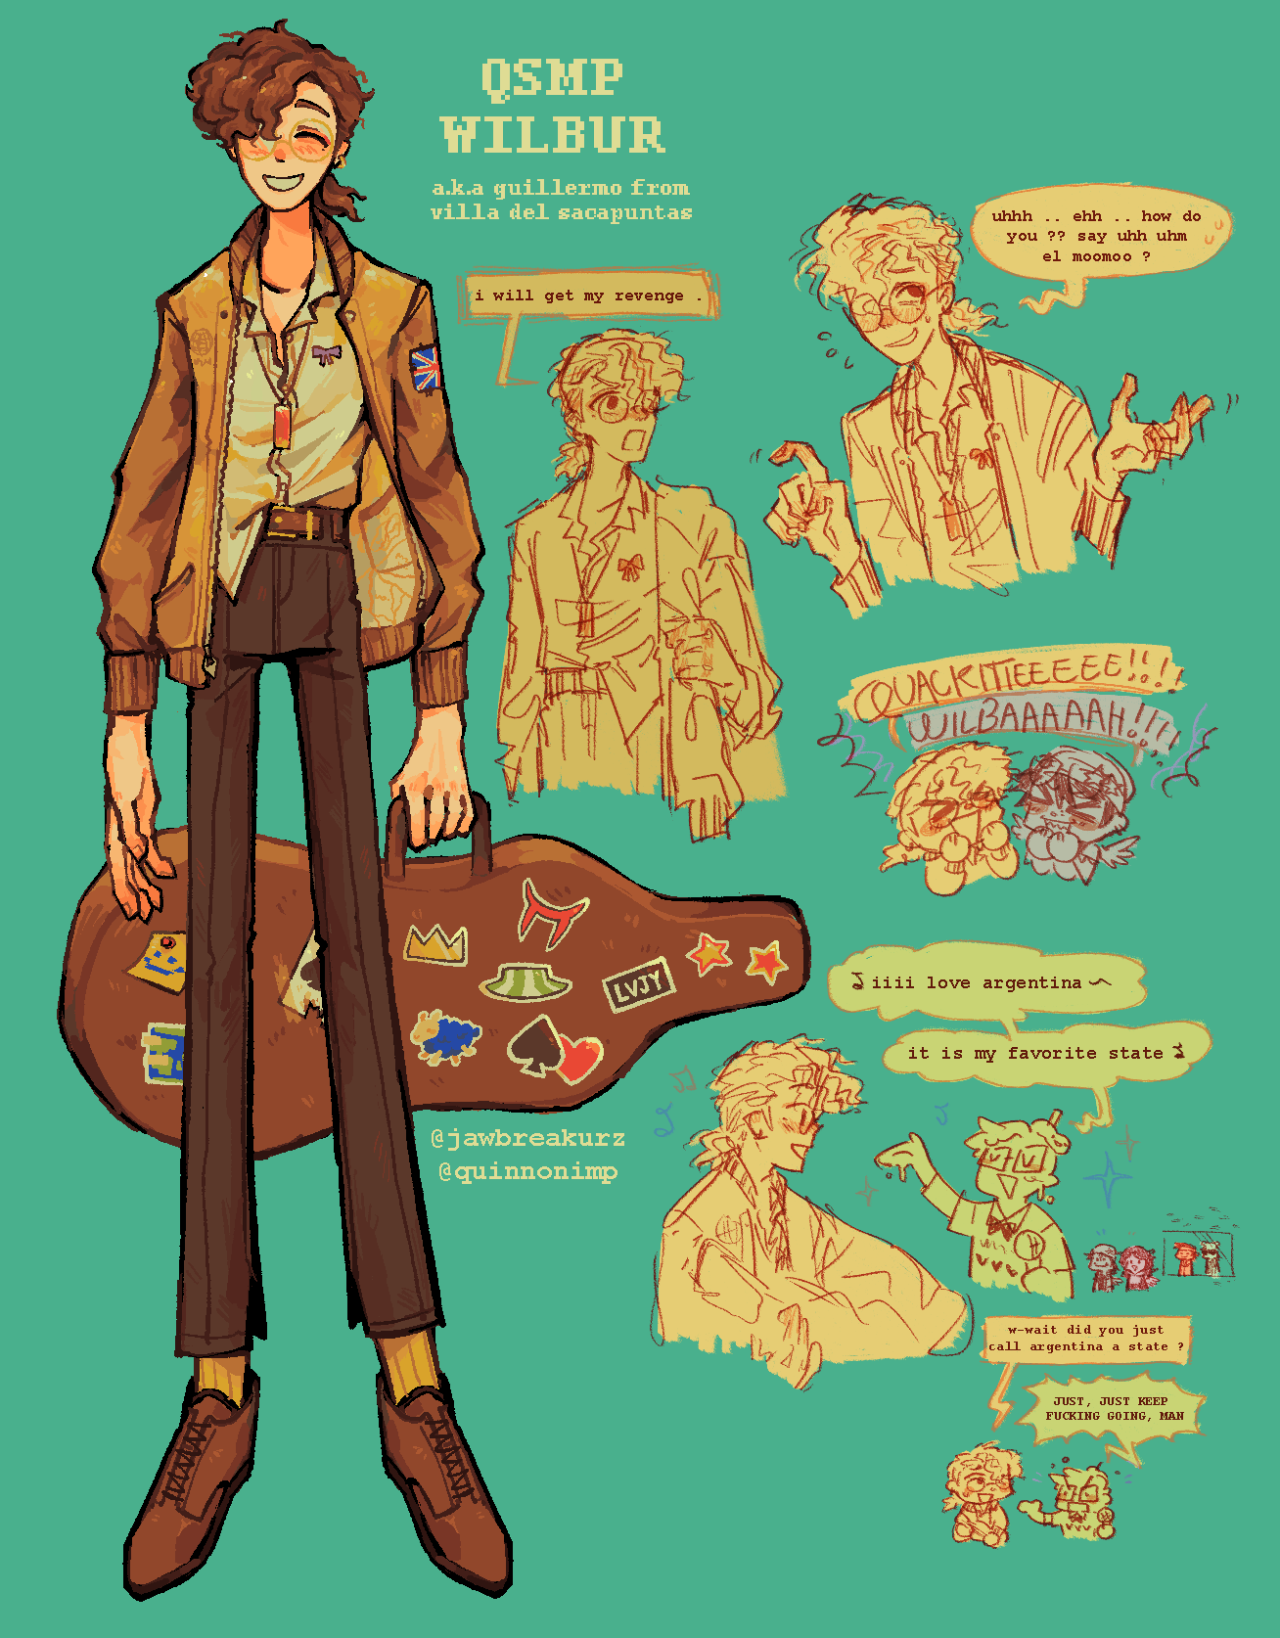 A drawing of Wilbur. He is depicted as wearing longer wavy hair tied back in a low ponytail, wearing a flight jacket with the UK flag sewn on the arm, a messy button-down shirt, dogtags, but sharp dress pants, yellow socks, and brown dress shoes. He carries a guitar with many stickers on the case. There are various comic-like drawings around the main one. One says 'I will have my revenge.' Another says 'uhh...ehhh...how do you??? say uhhh uhm el moomoo?' 'Quackitie!!! Wilbahhh!' 'iii love argentina, it is my favorite state', 'w-wait, did you just call argentina a state?', 'JUST KEEP FUCKING GOING MAN'